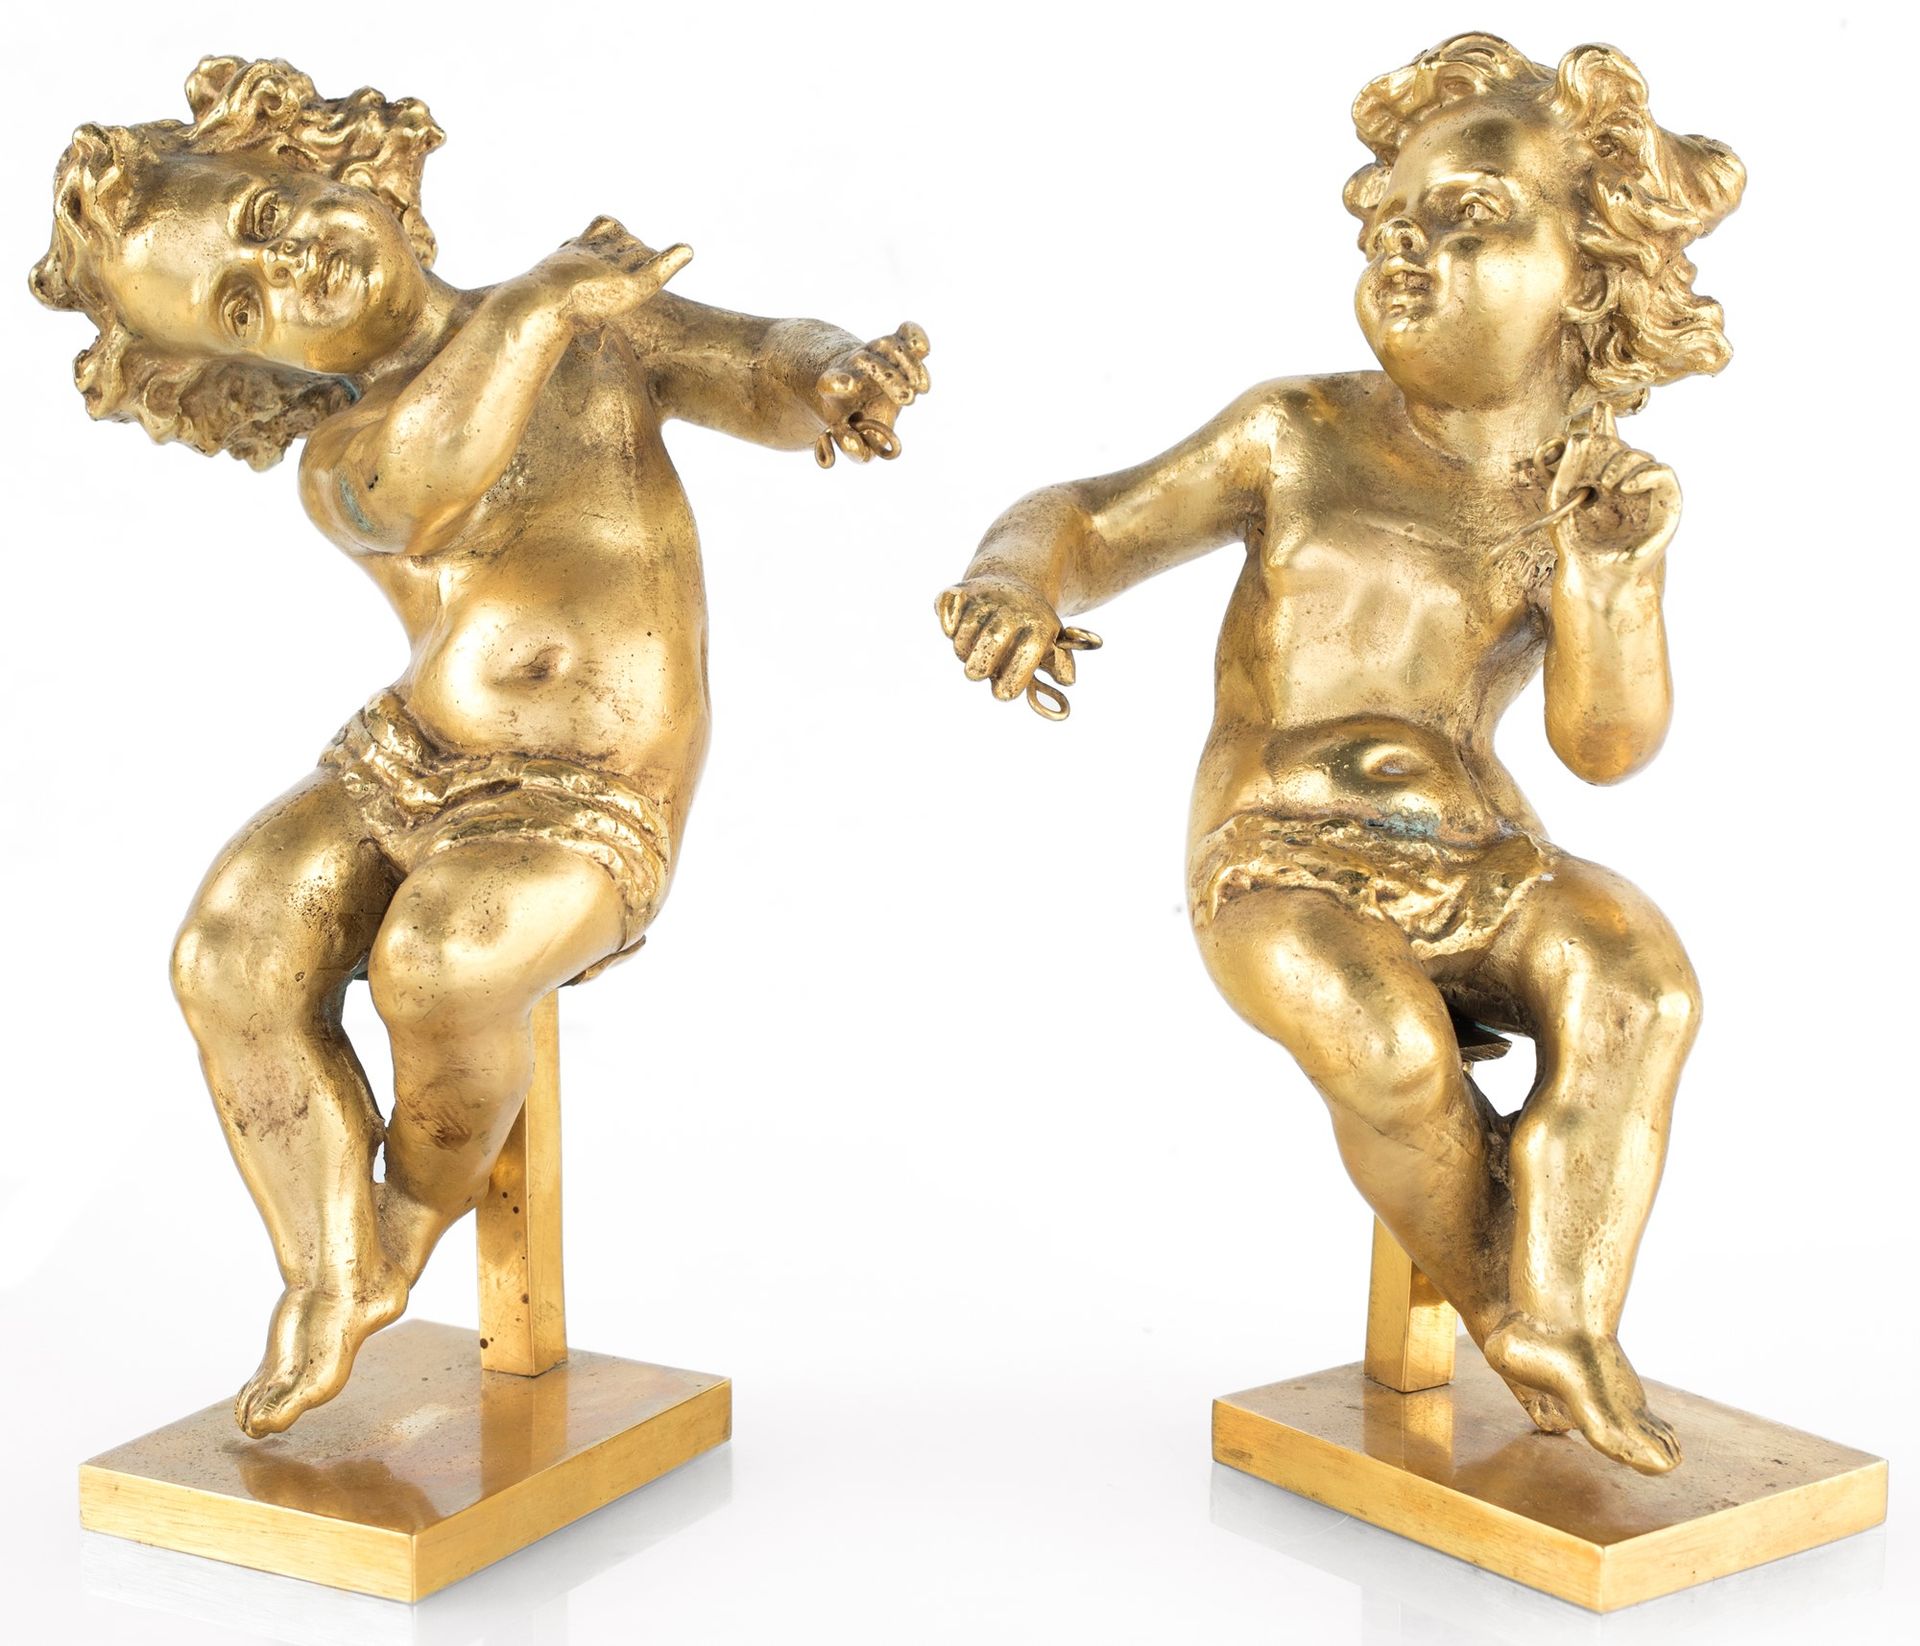 Pair of small gilt bronze sculptures, Naples, late 18th / early 19th century 描绘了&hellip;